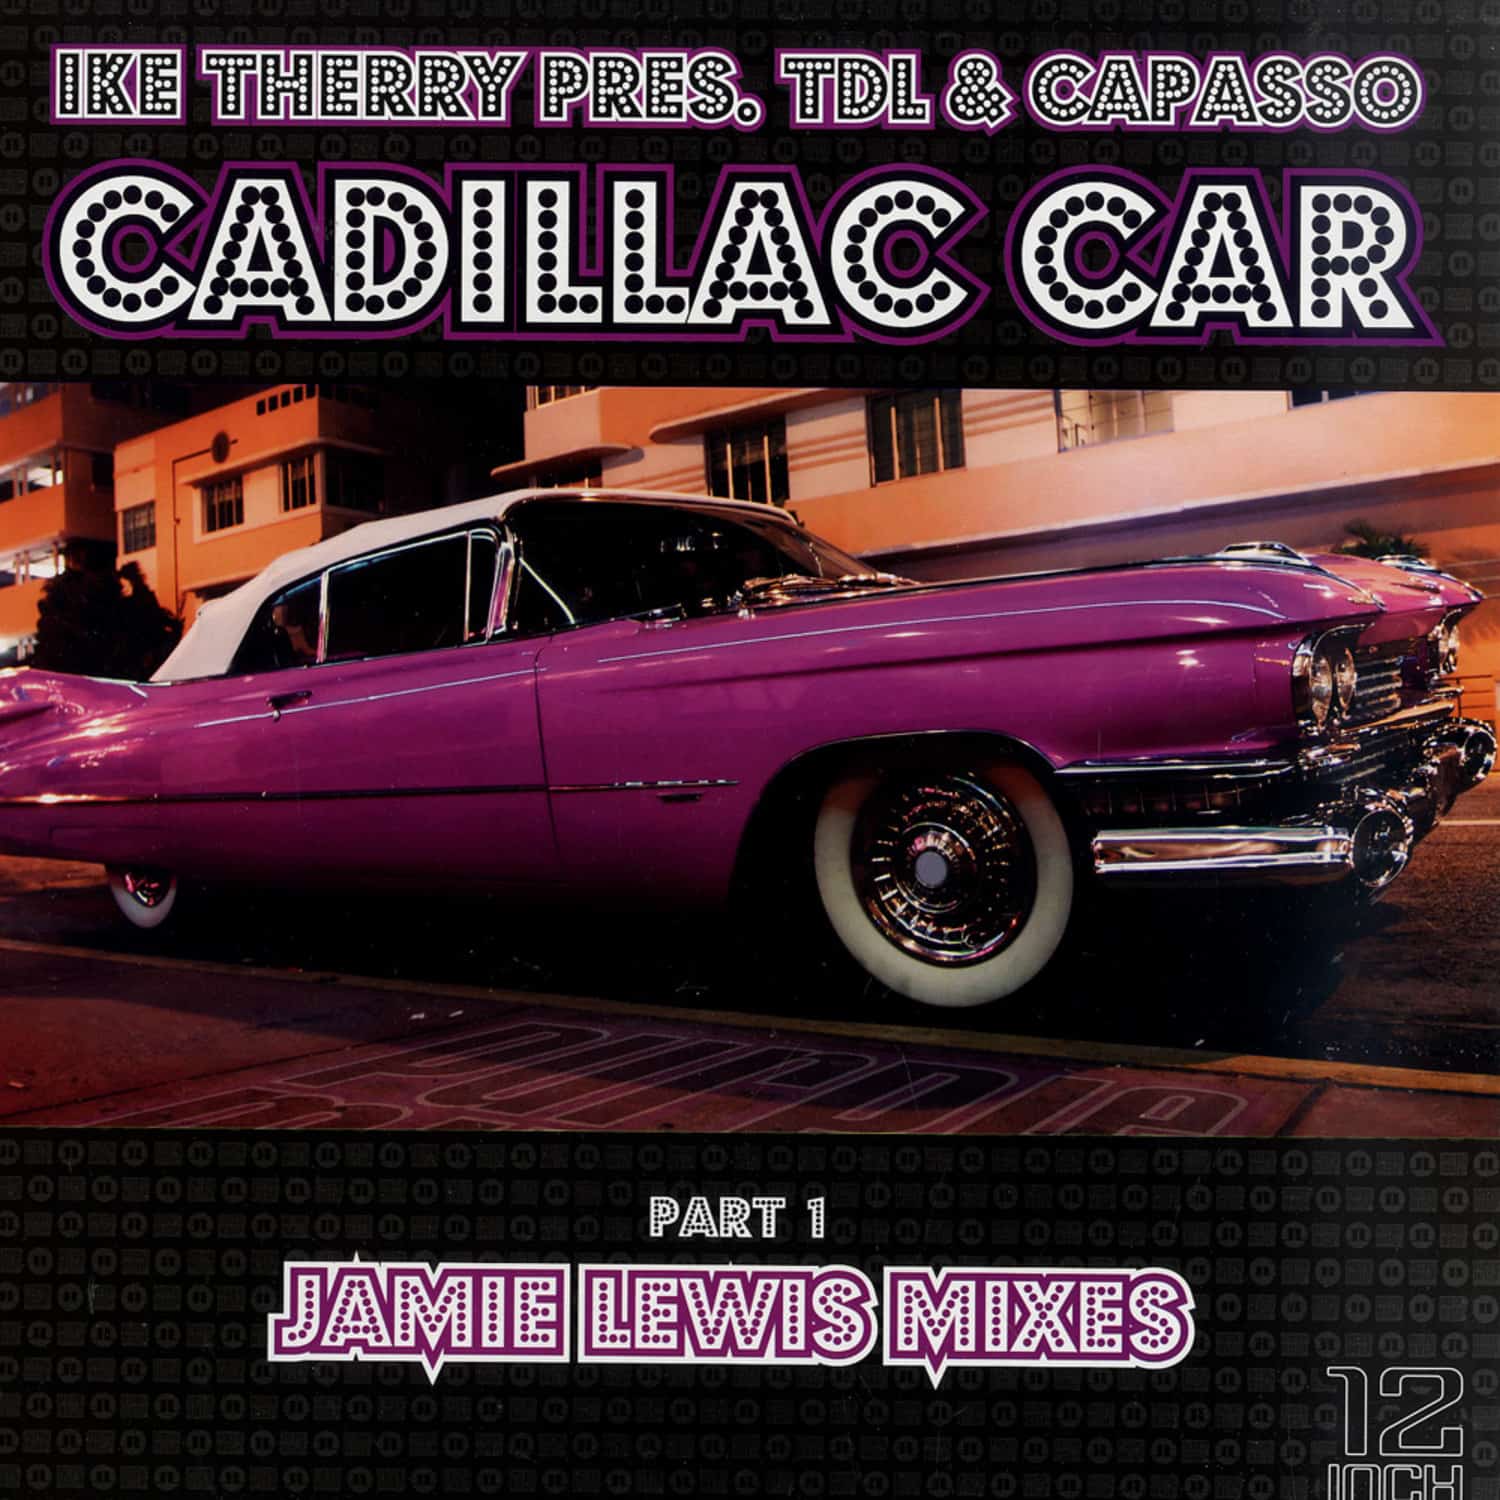 Ike Therry present TDL - CADILLAC CAR 